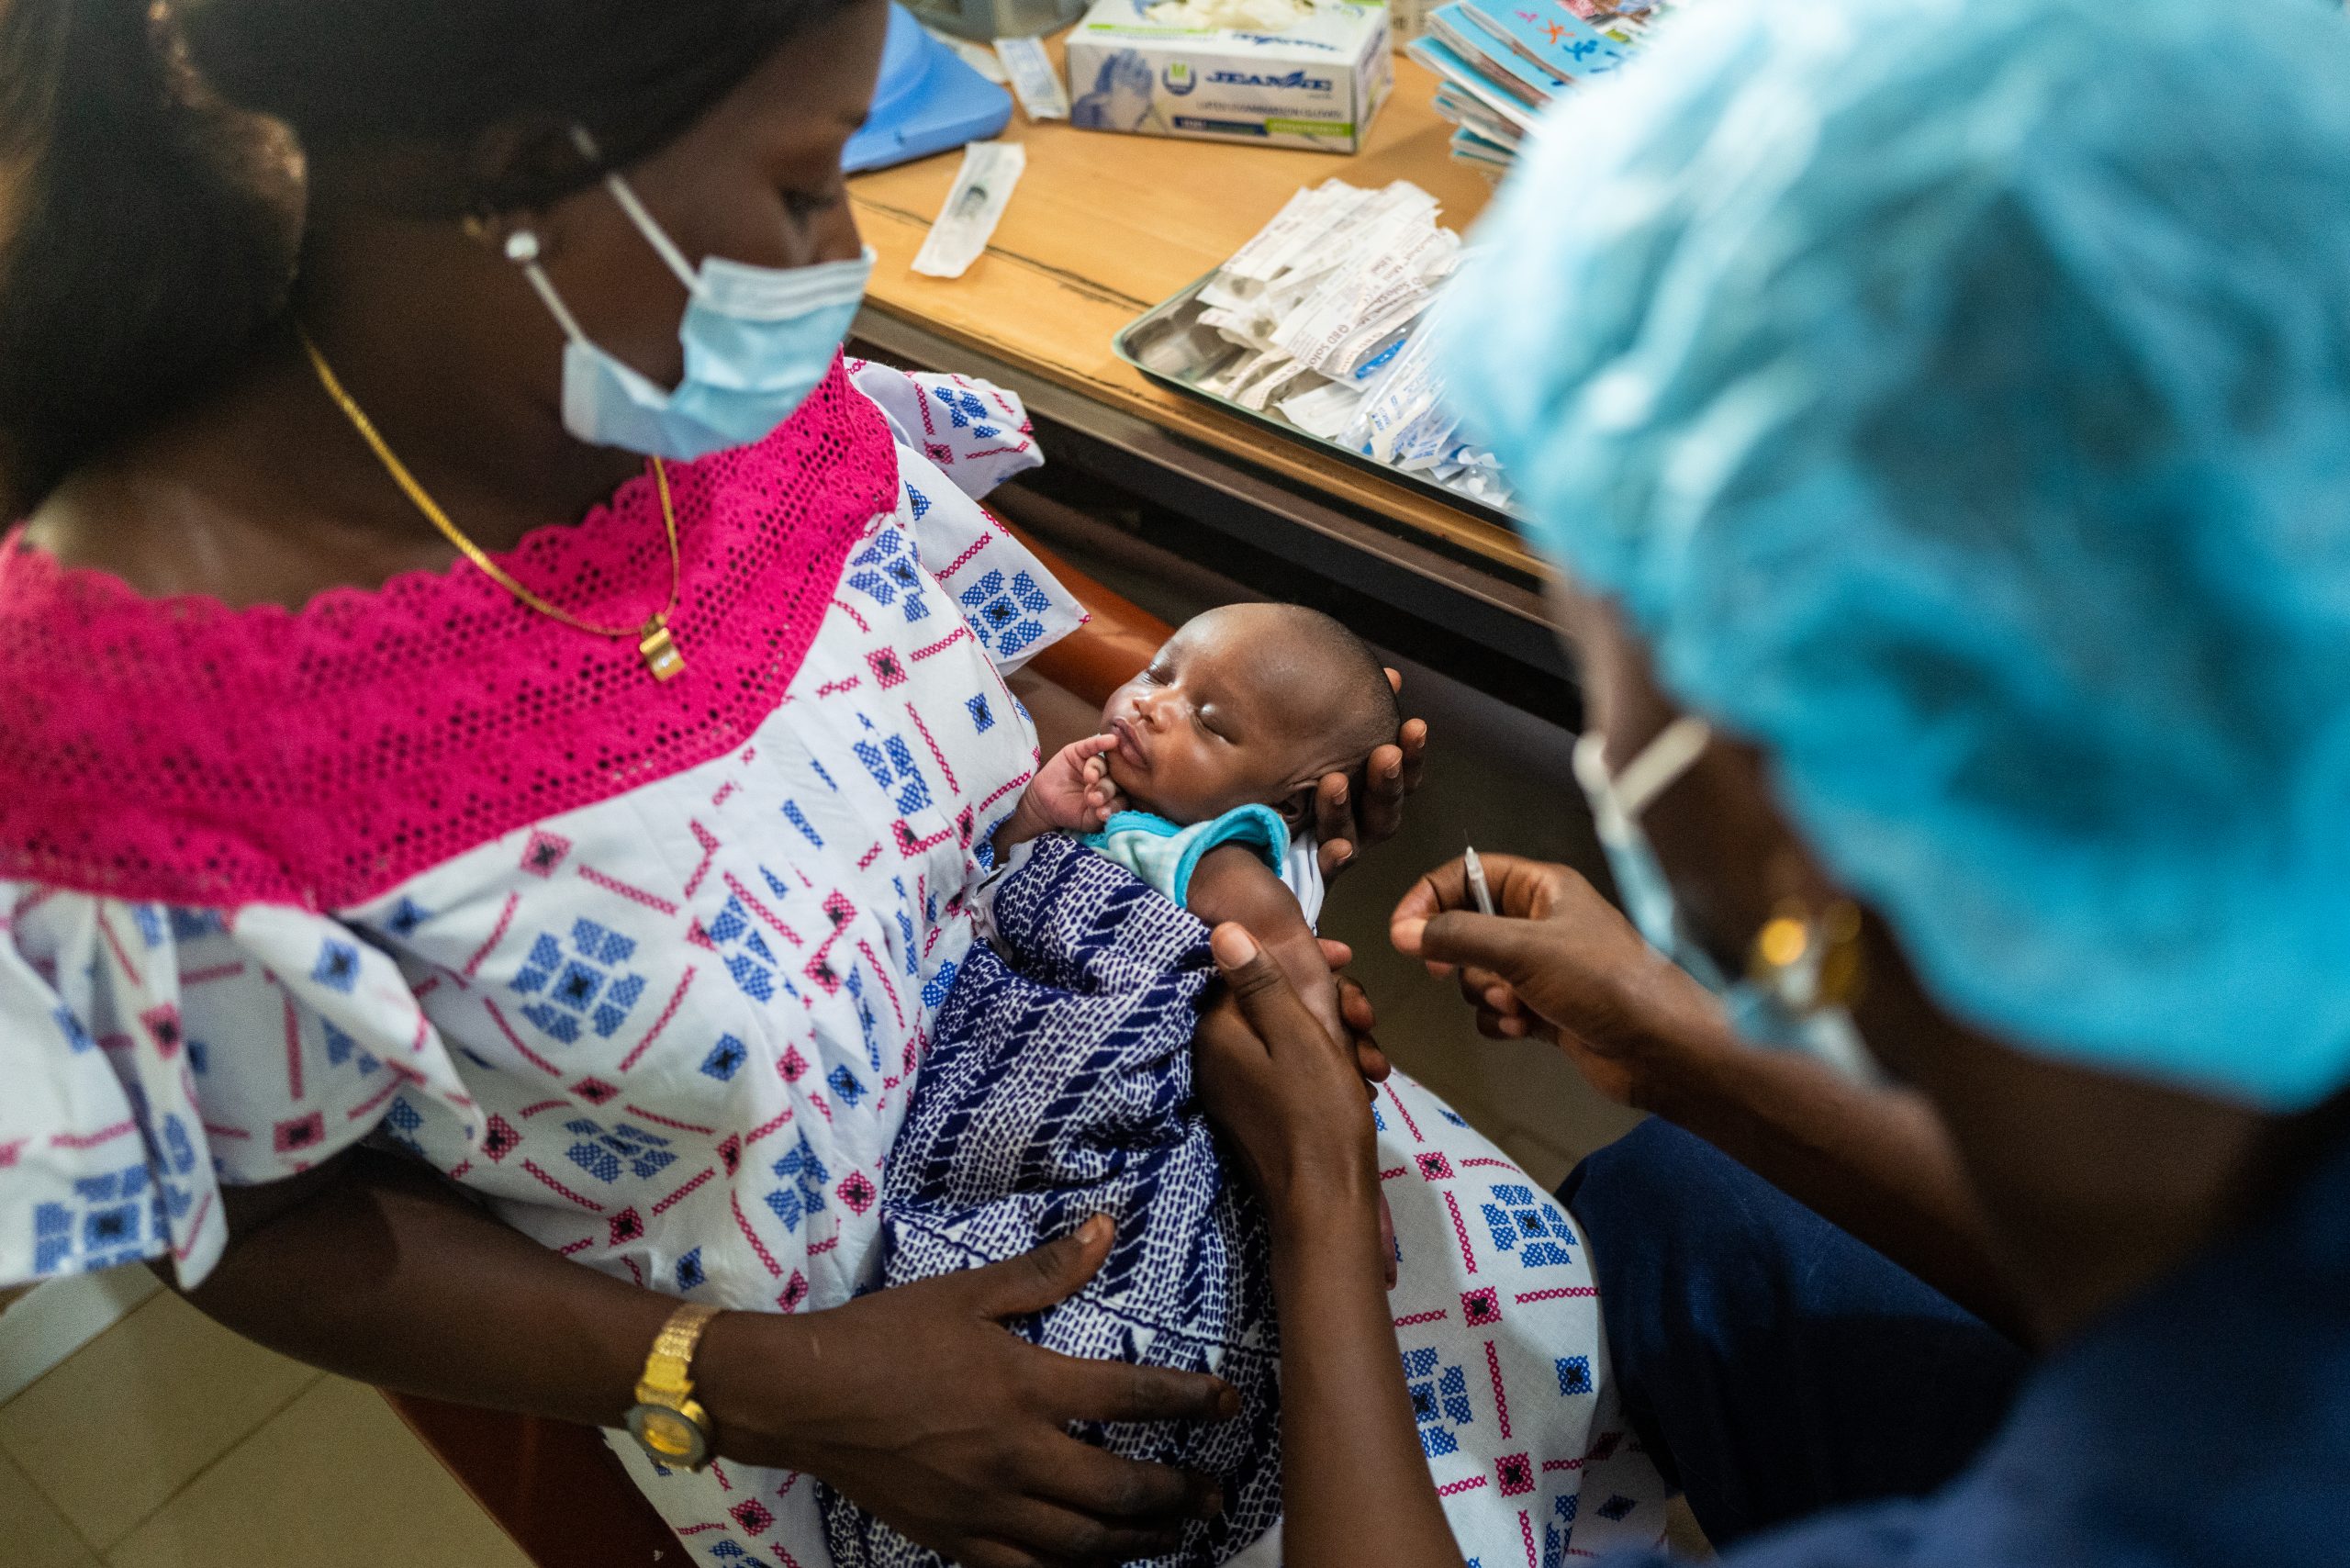 Image of a woman holding an infant about to receive a vaccination.